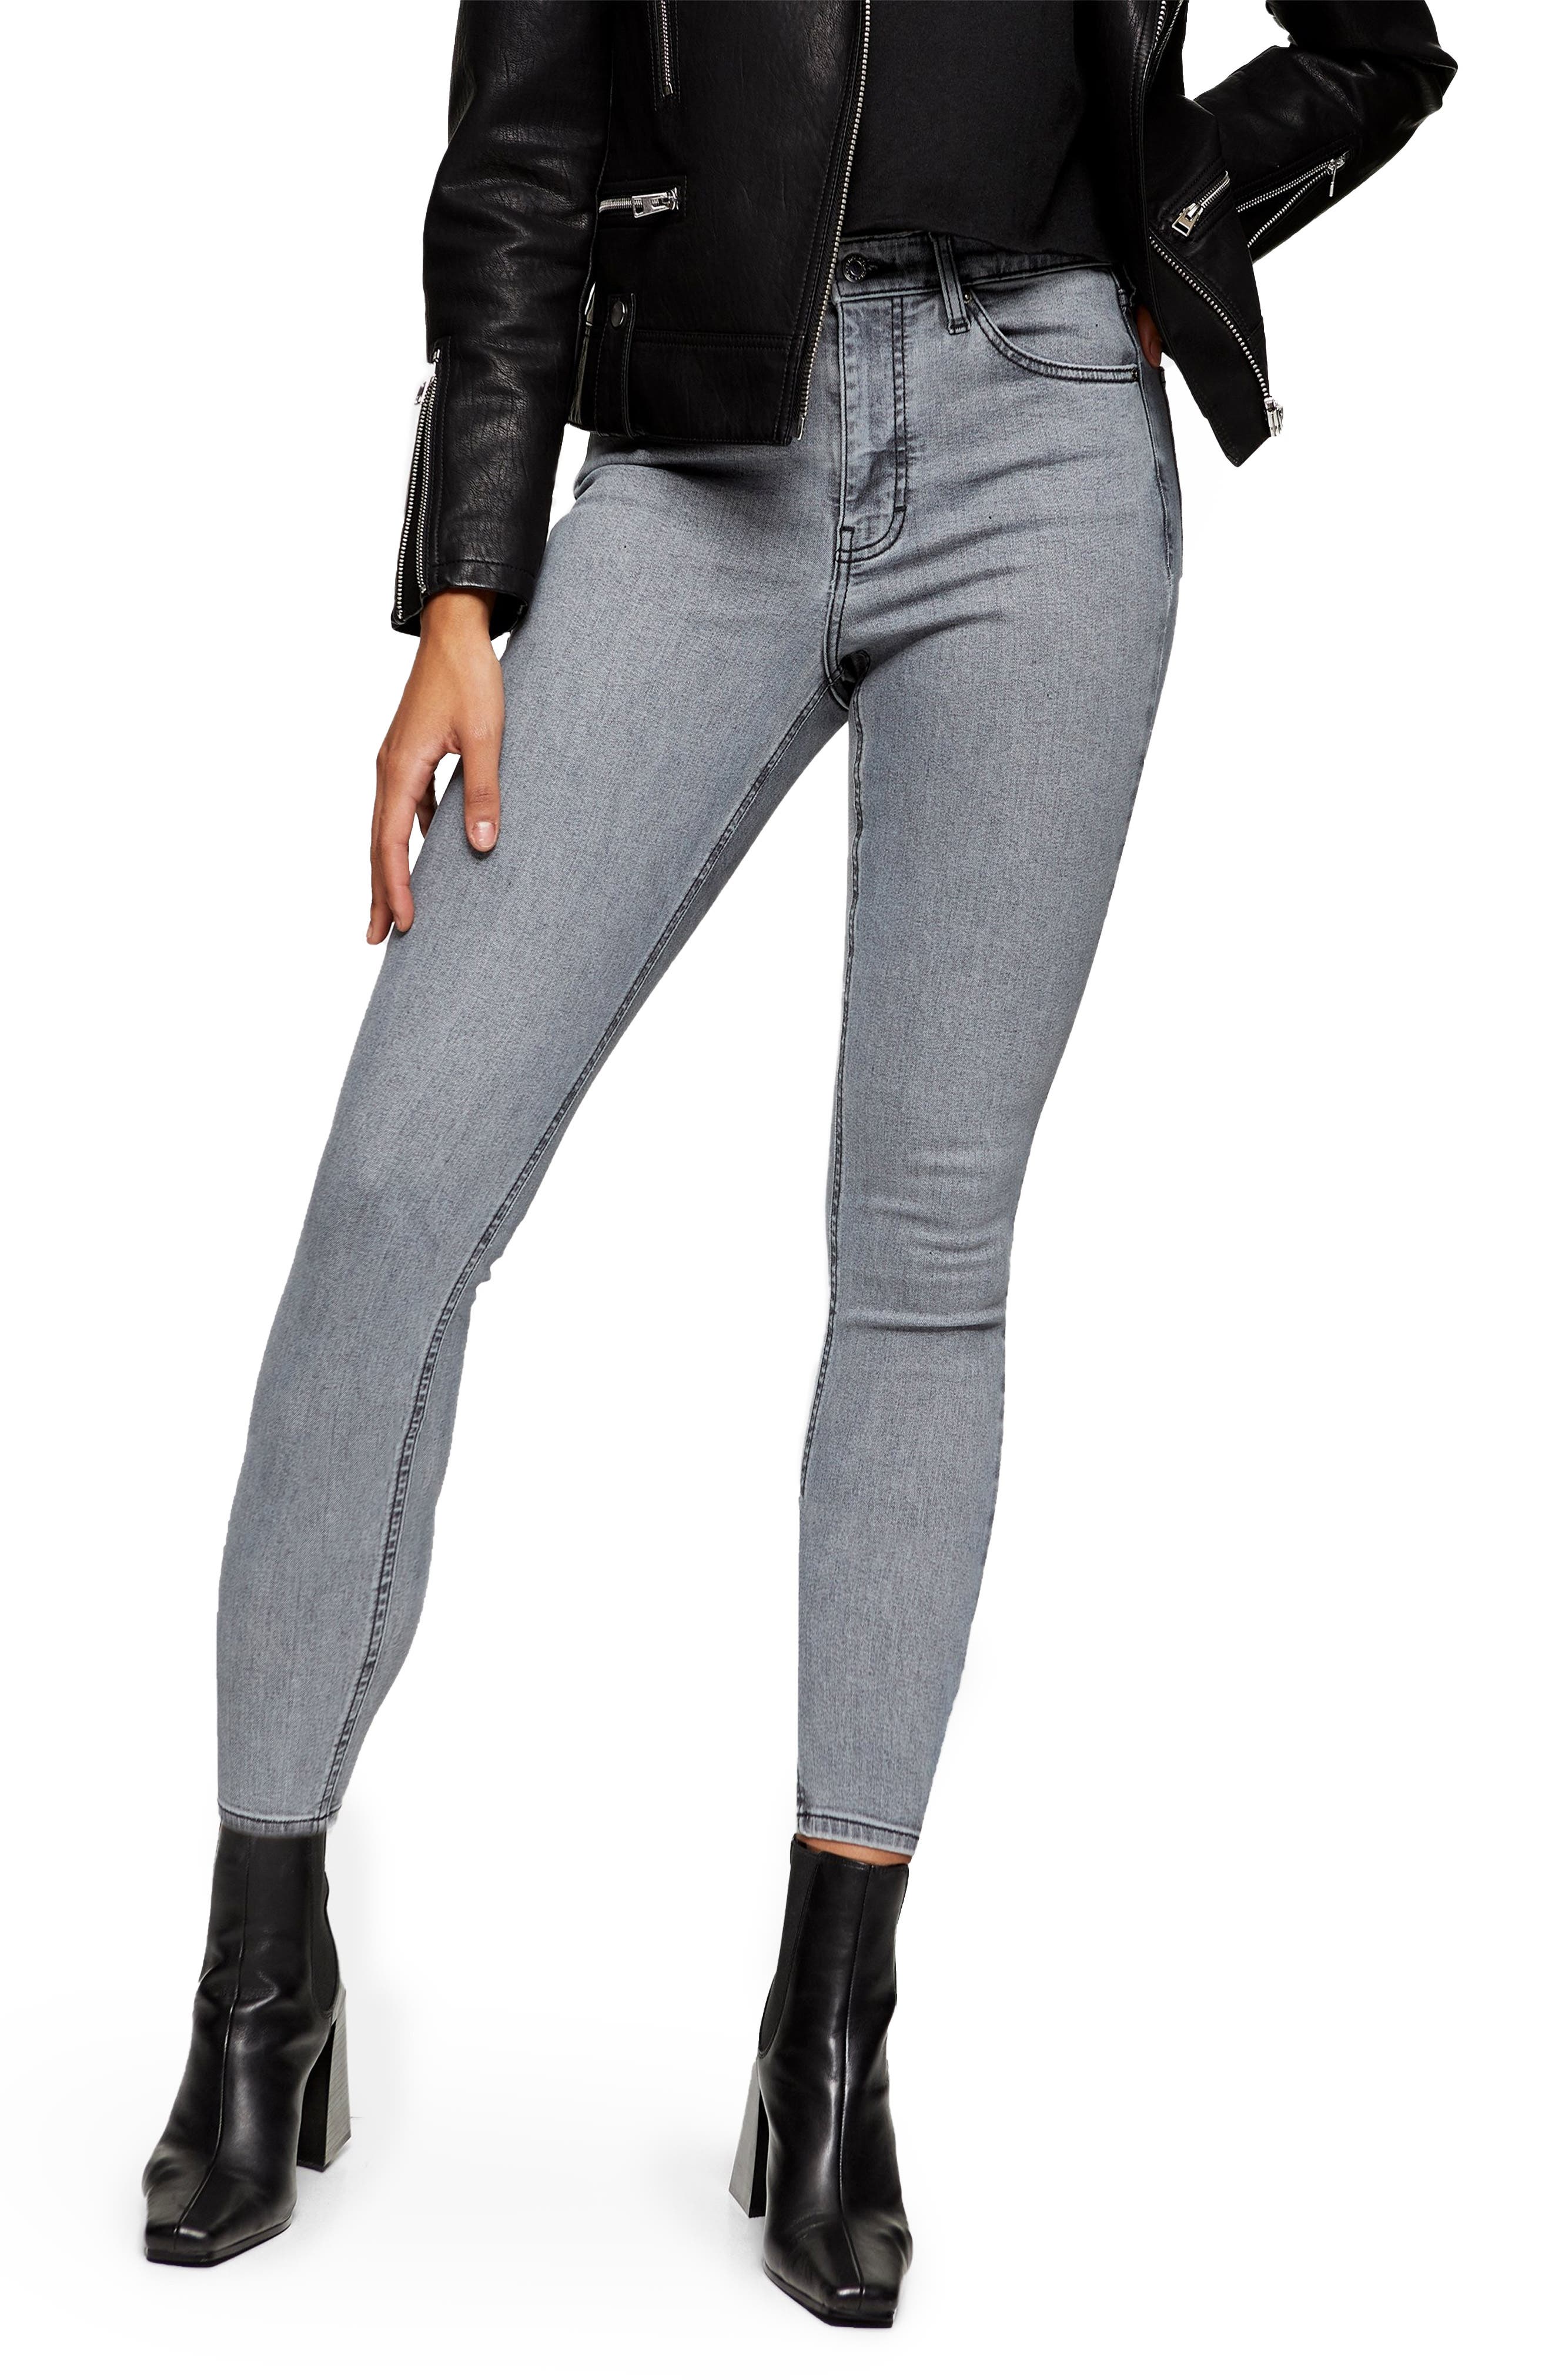 washed grey jeans womens